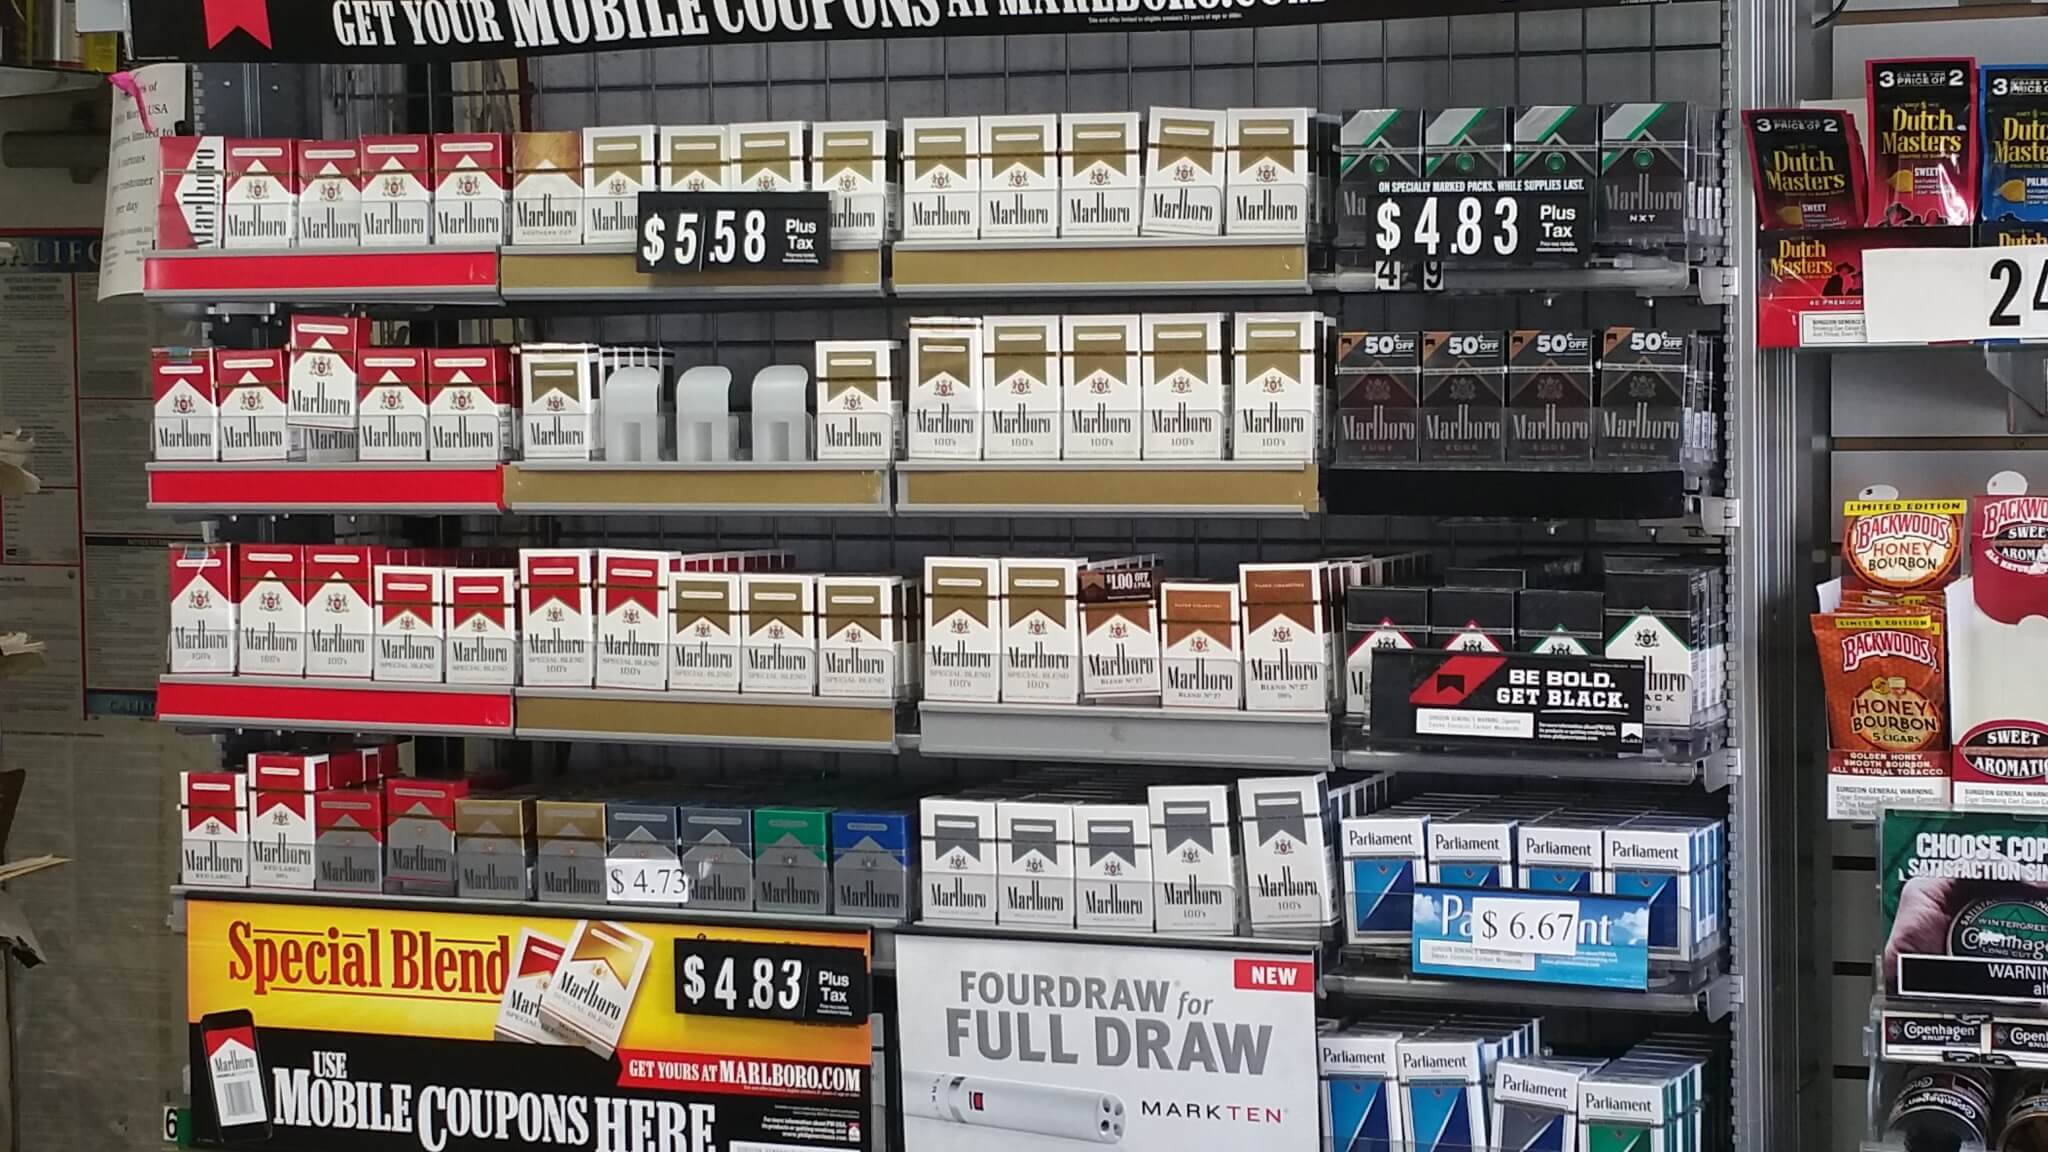 the average cost of a pack of cigarettes in CA